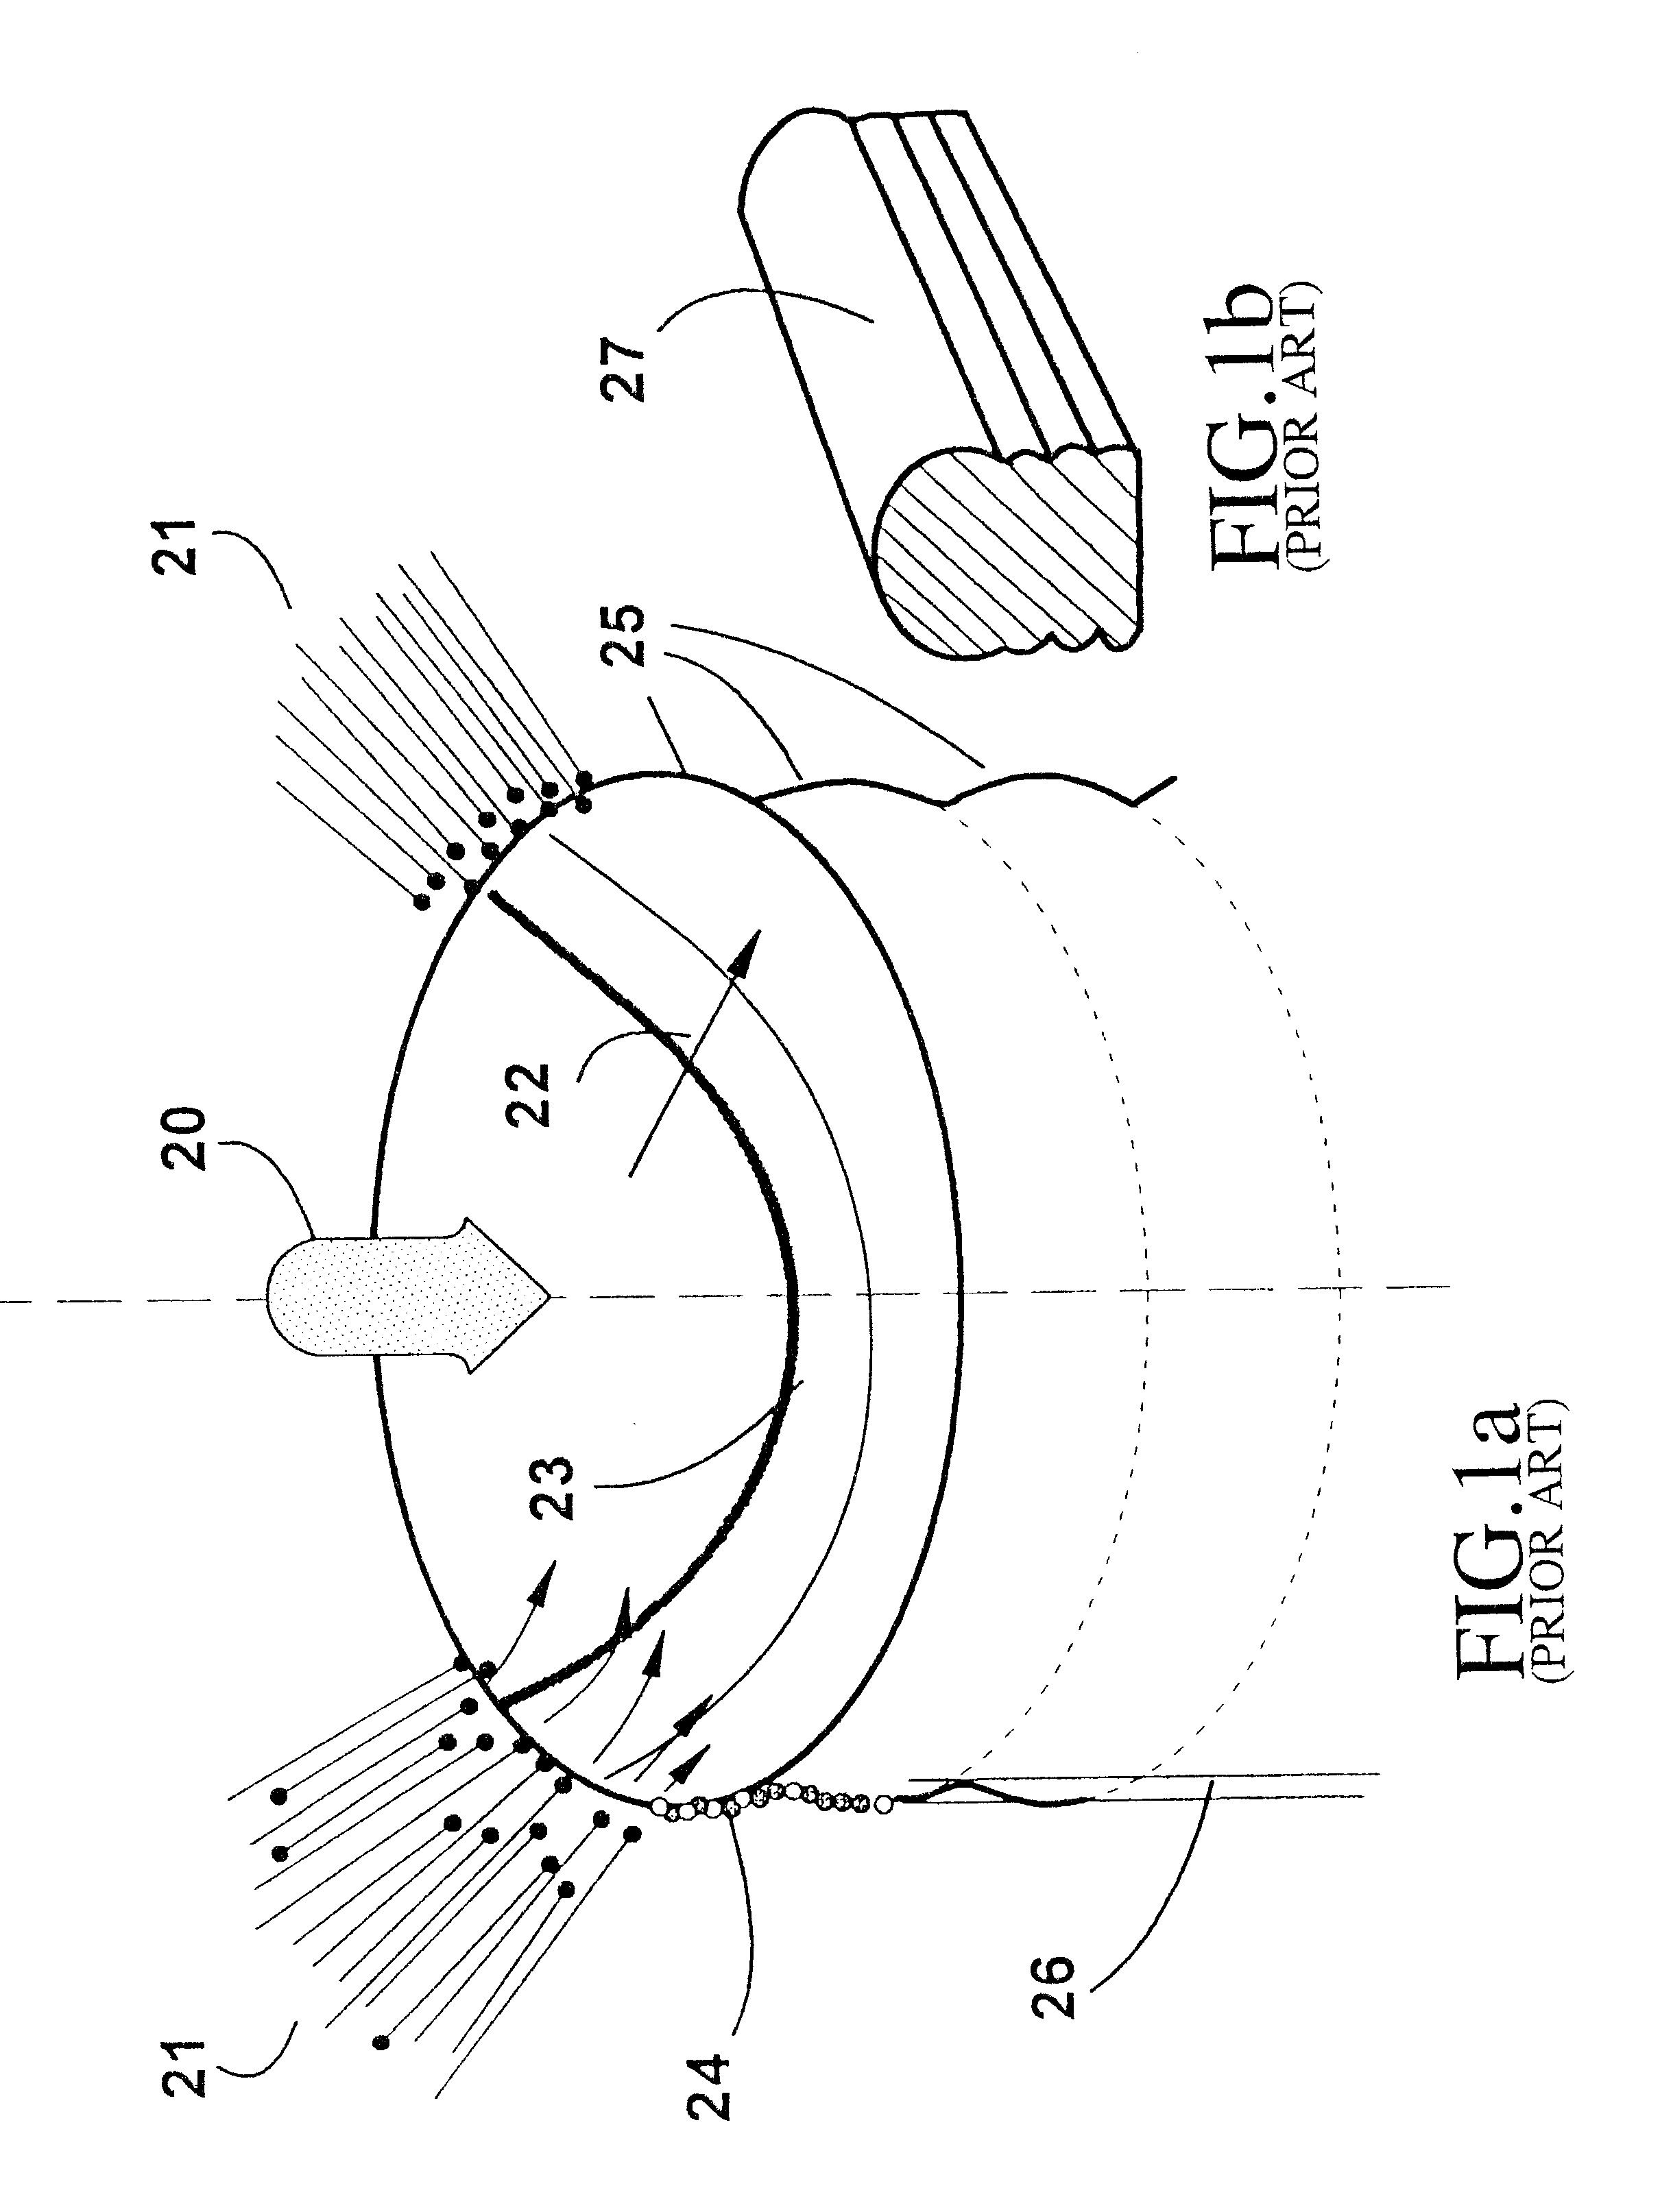 Laser consolidation methodology and apparatus for manufacturing precise structures